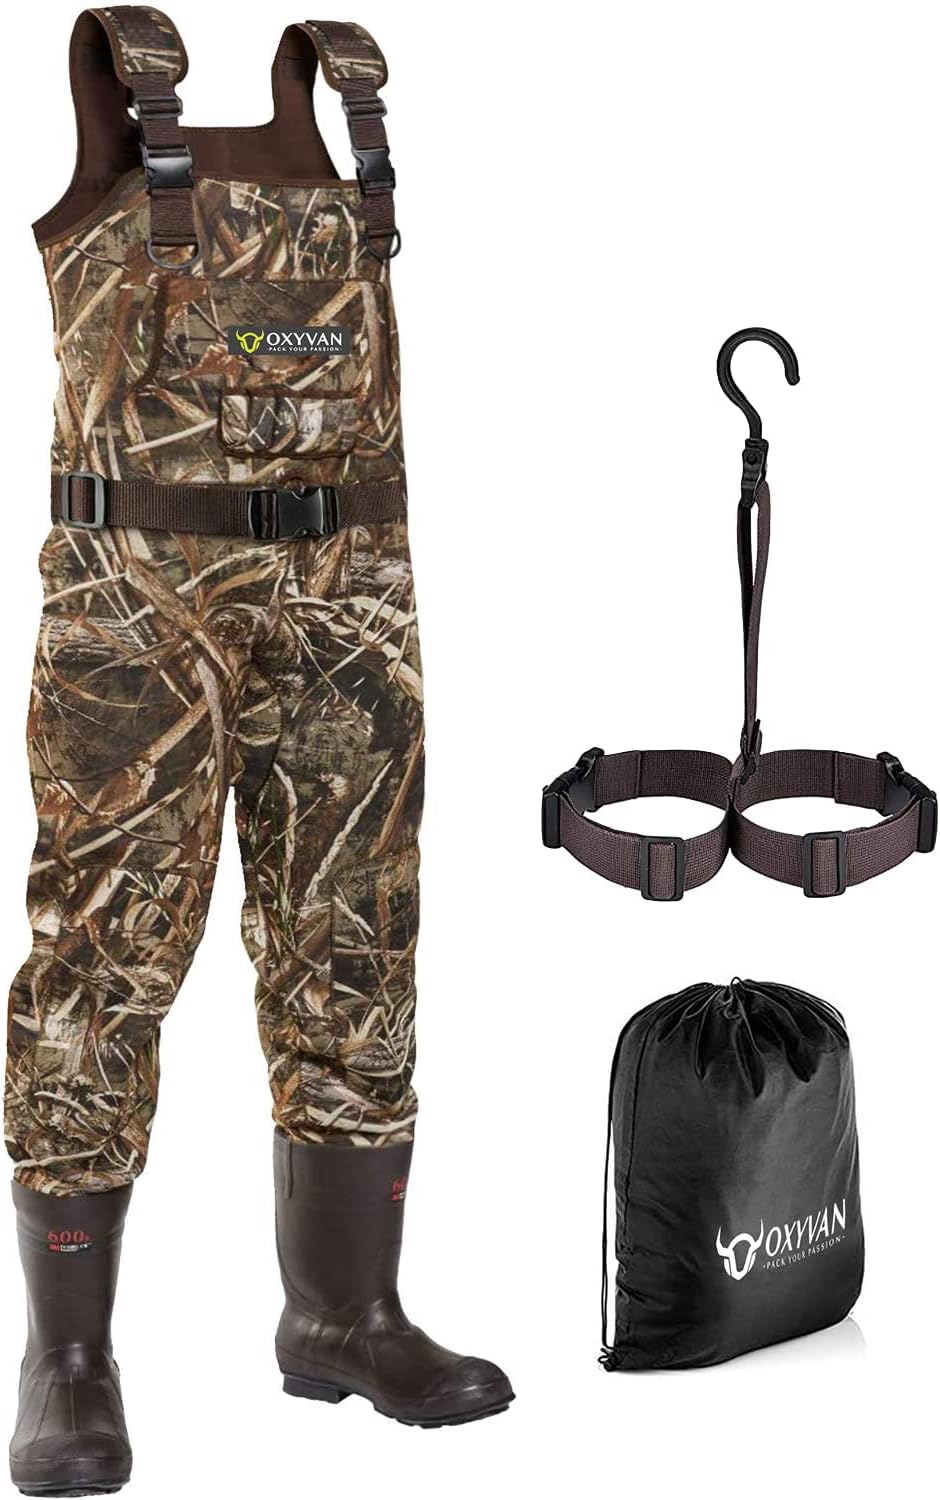 Oxyvan Duck Hunting Waders With 600G Rubber Boots Waterproof Insulated, Neoprene Realtree Max5 Camo Fishing Chest Waders For Big And Tall Men  Women Us 7(Includes Boots Hangerstorage Bag)